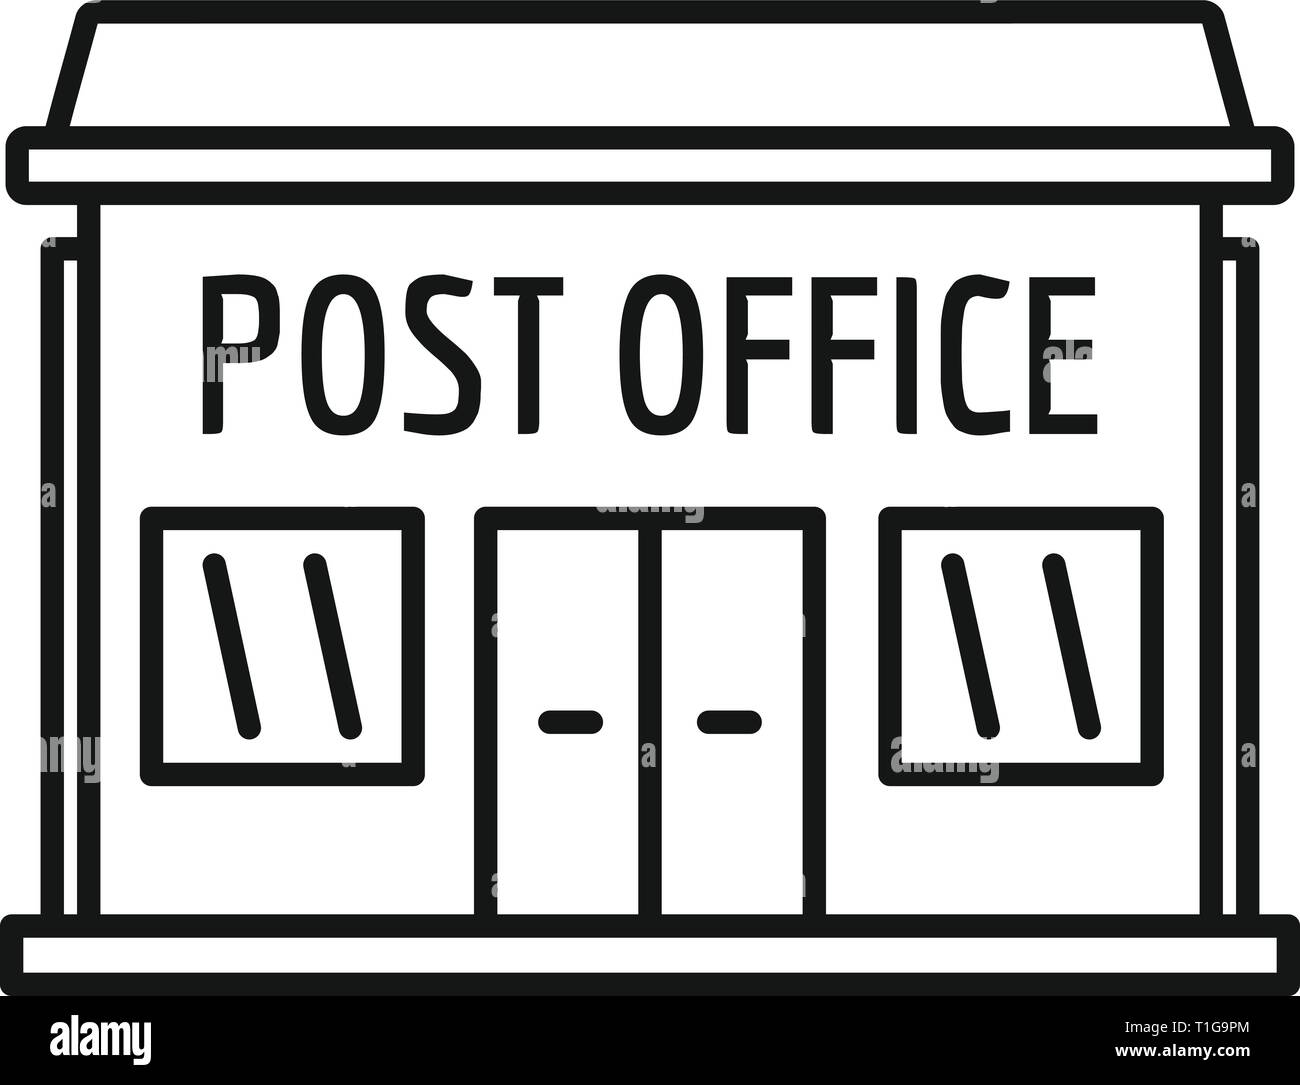 post office clipart black and white